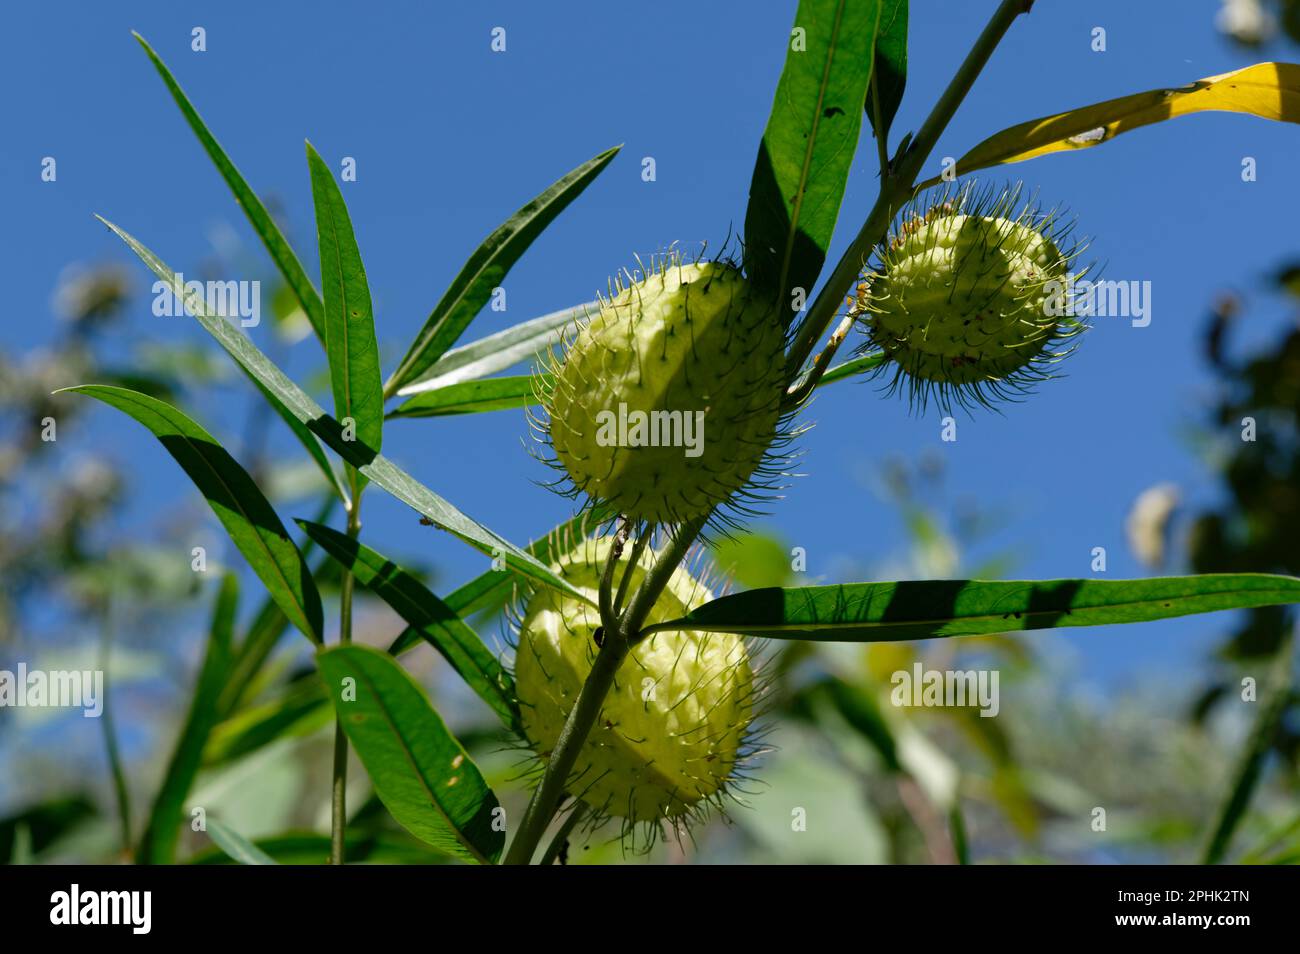 Swan plant seed heads are forming on the plant Stock Photo